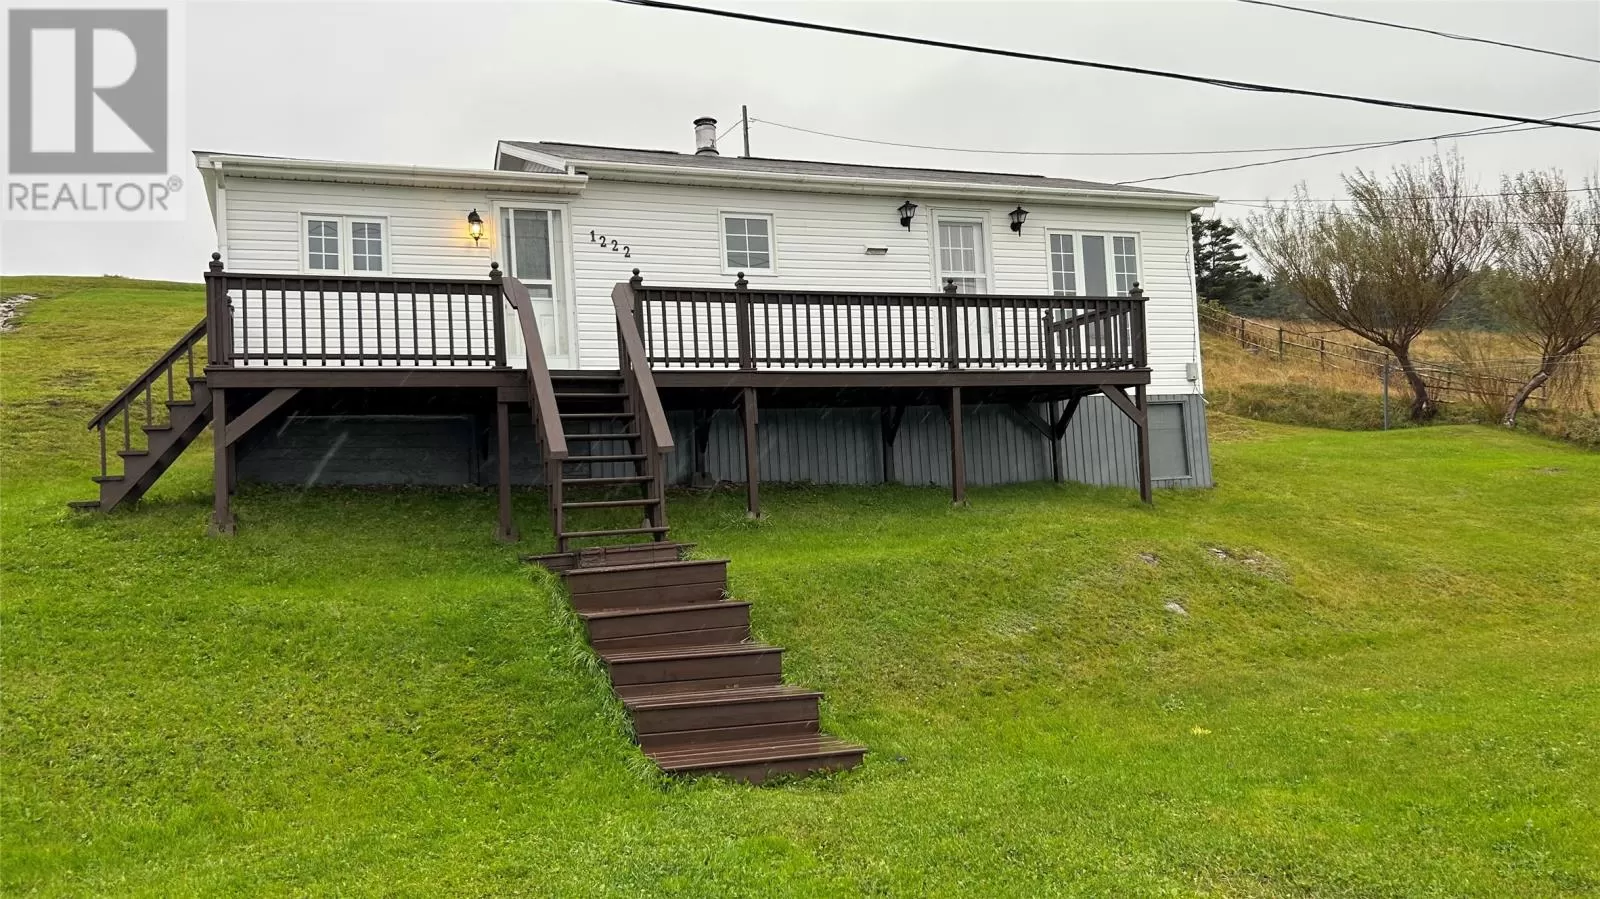 House for rent: 1222 Oceanview Drive, CAPE ST GEORGE, Newfoundland & Labrador A0N 1T1